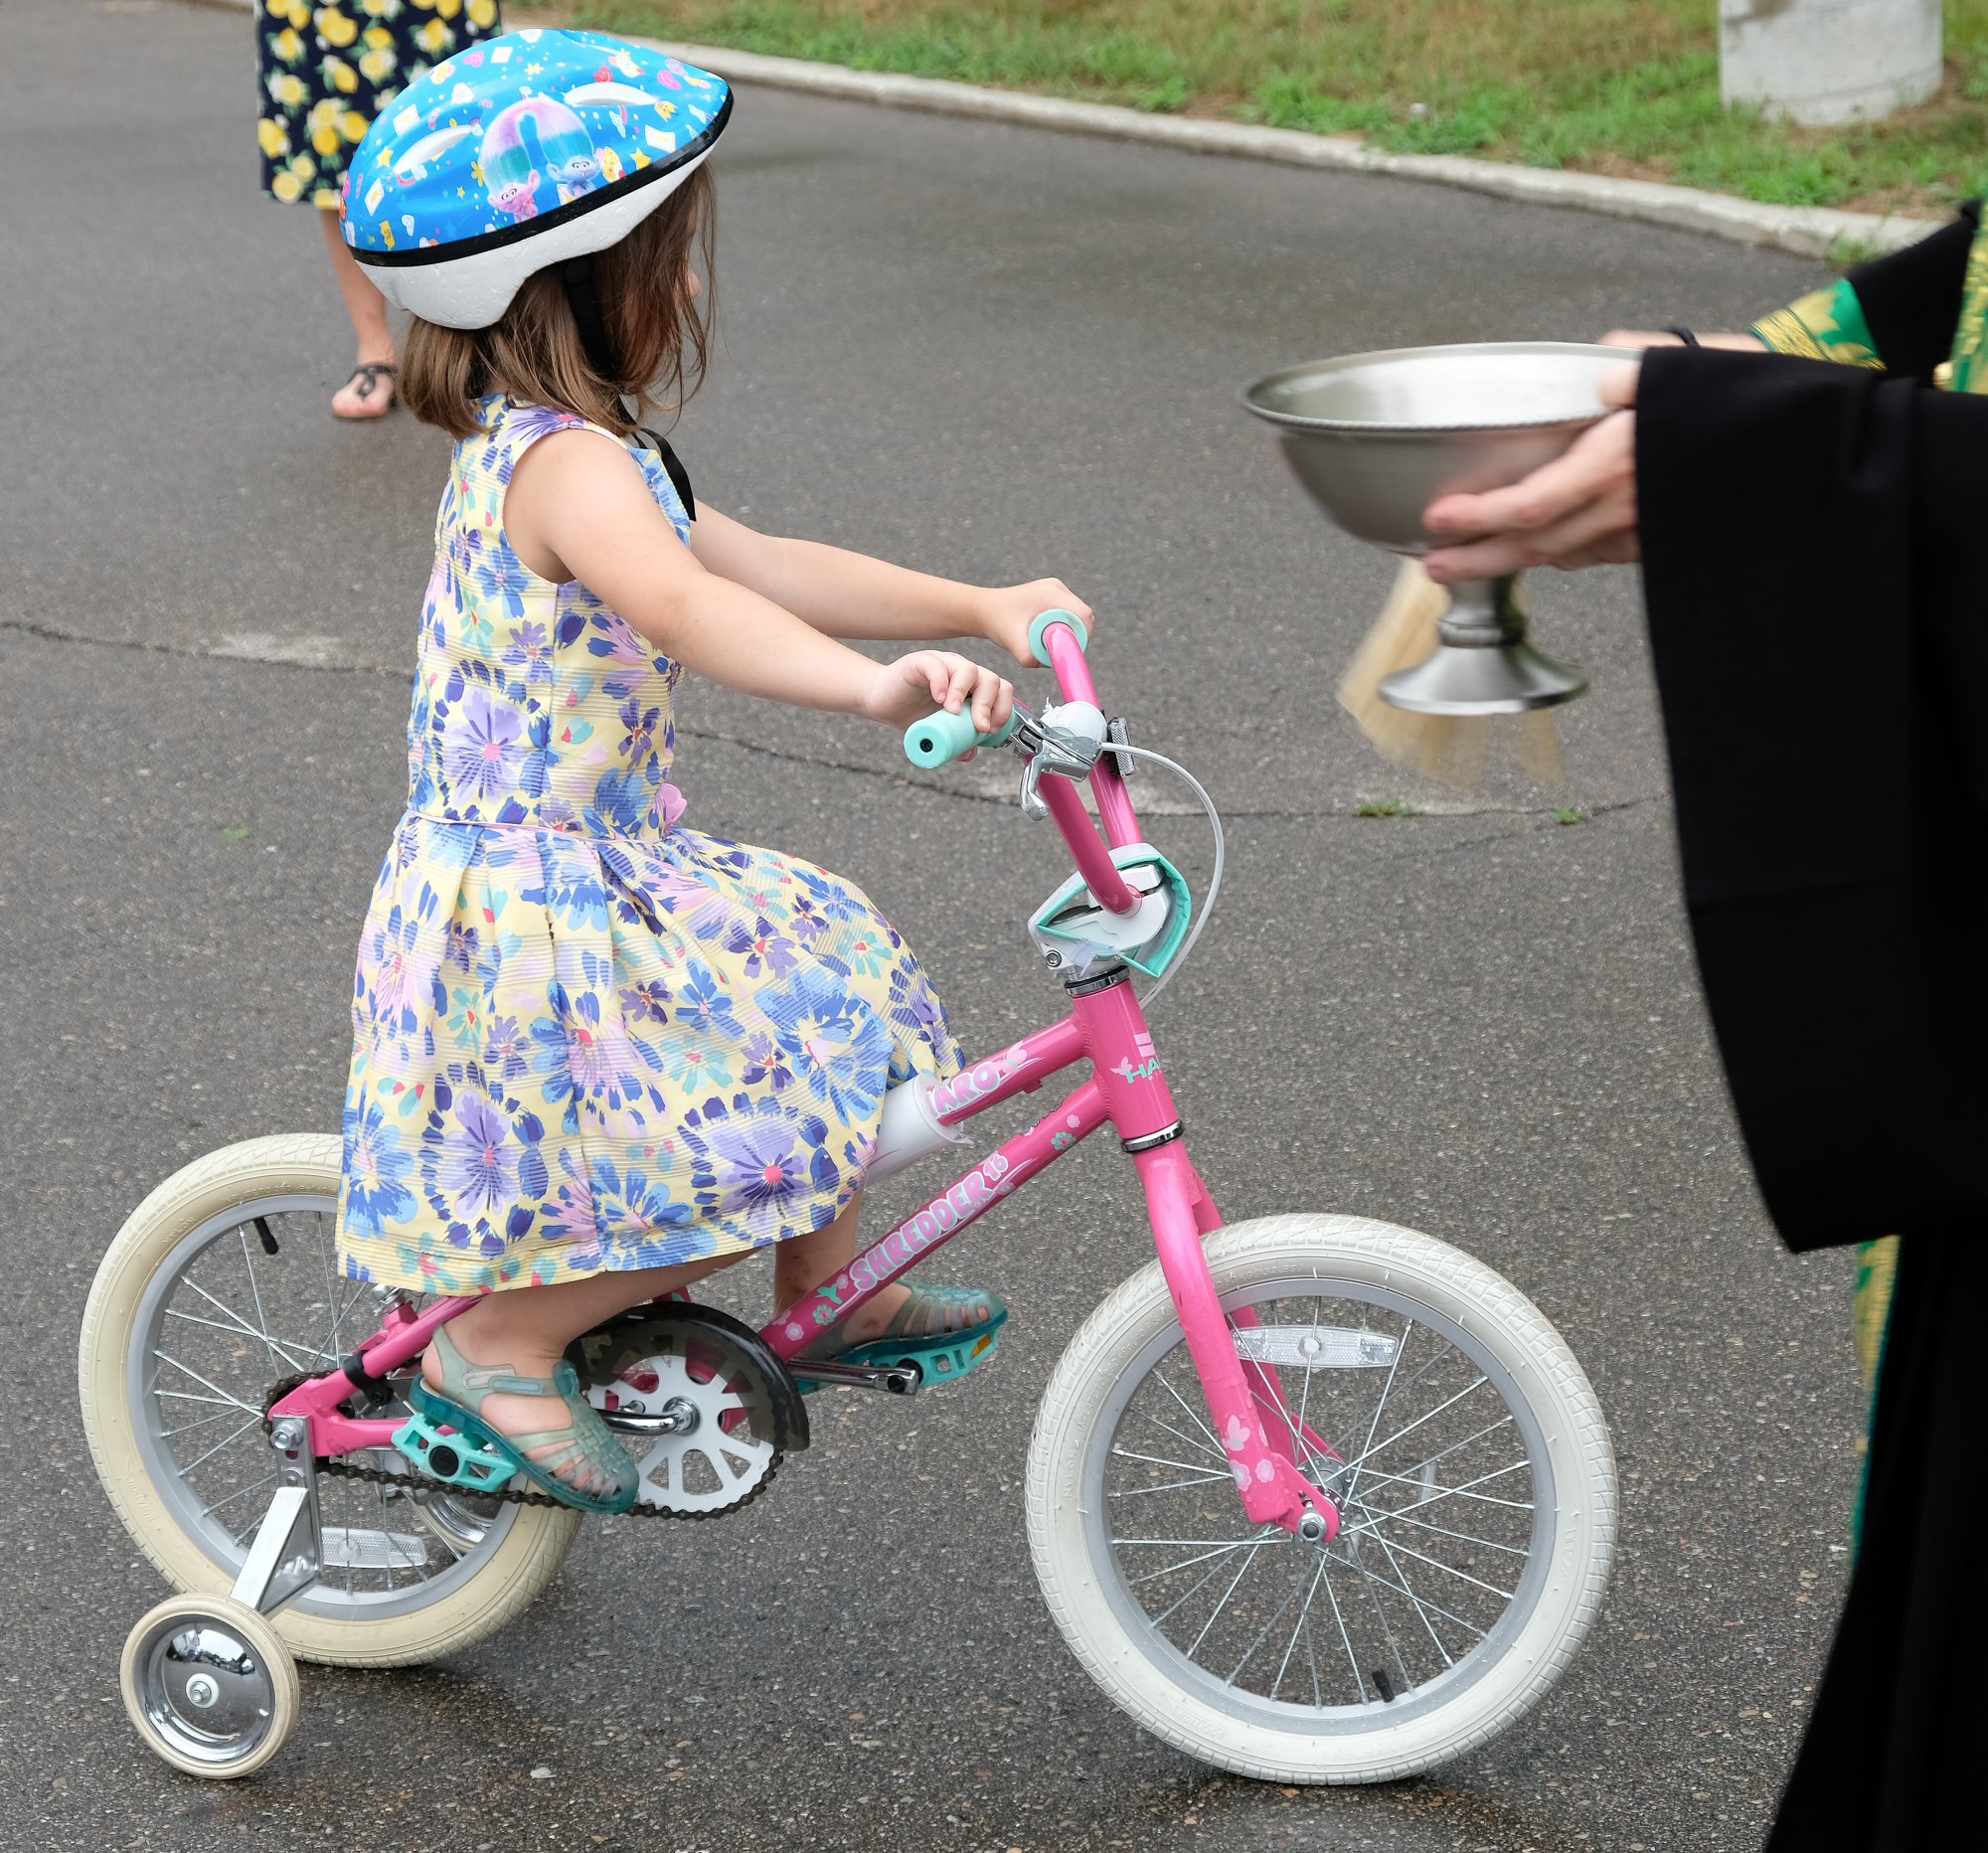  priest blessing young girl on a pink bike  